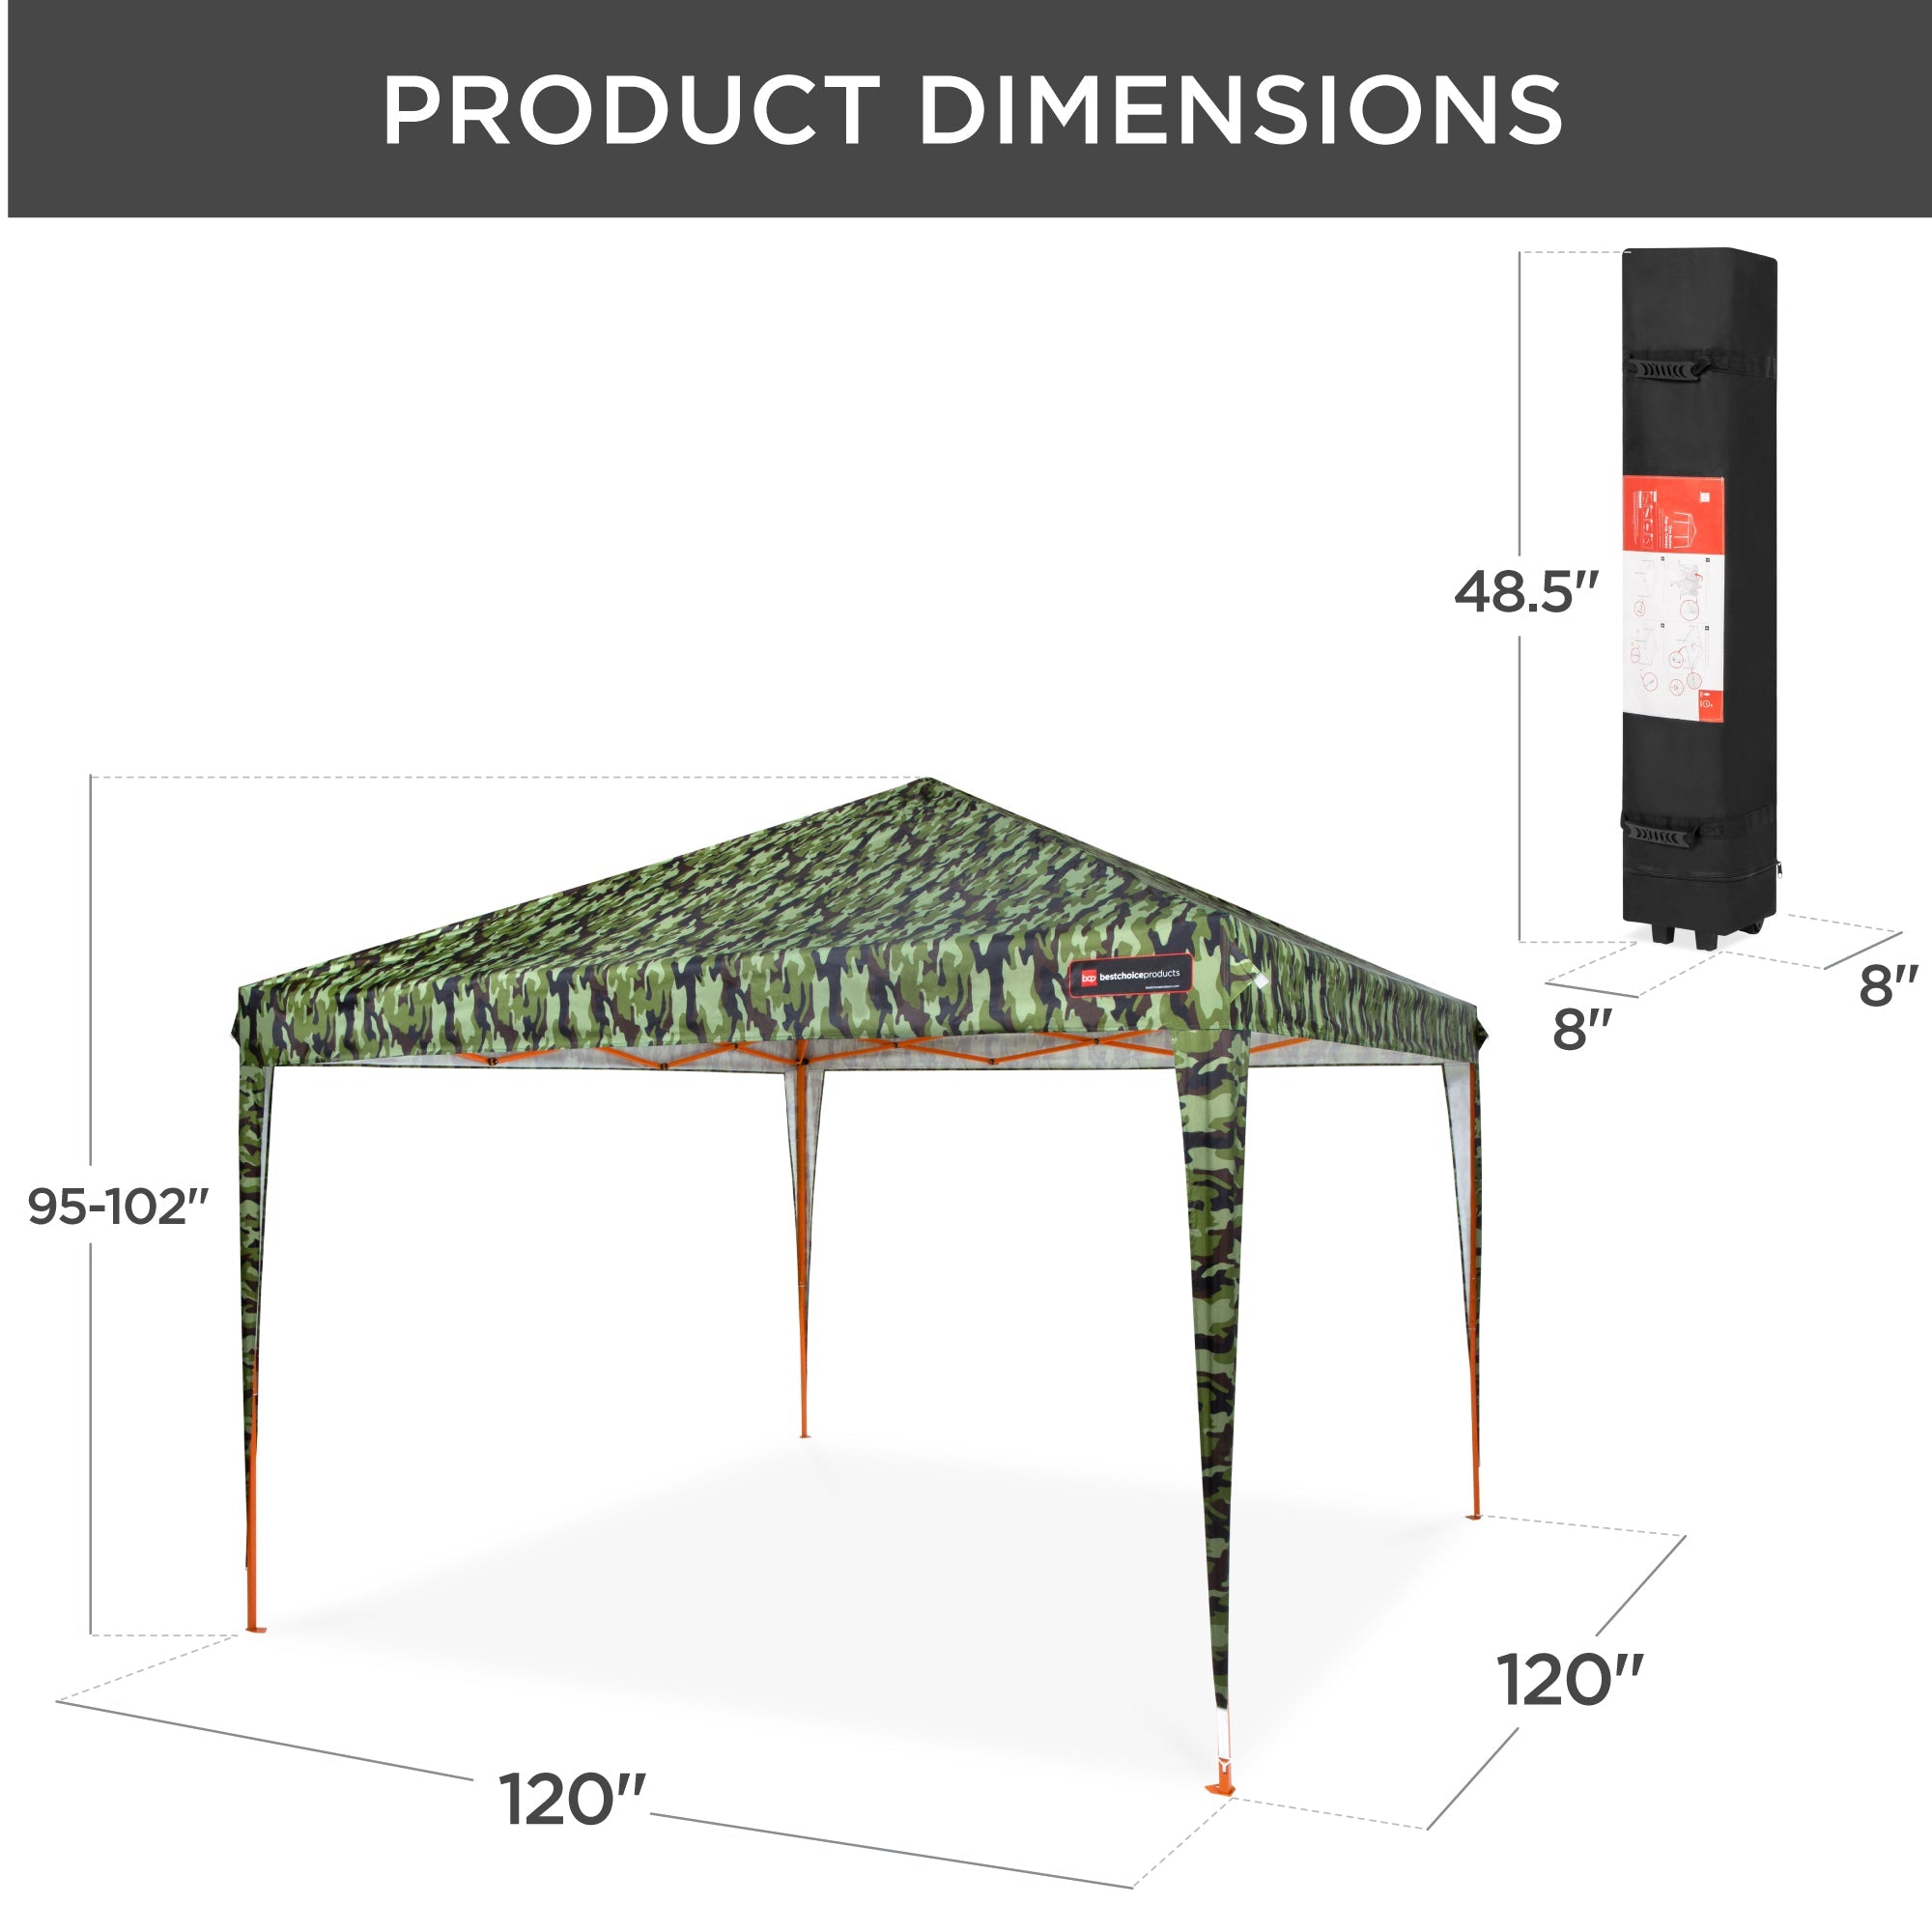 Best Choice Products 10x10ft Outdoor Portable Adjustable Instant Pop Up Gazebo Canopy Tent w/ Carrying Bag - Camo